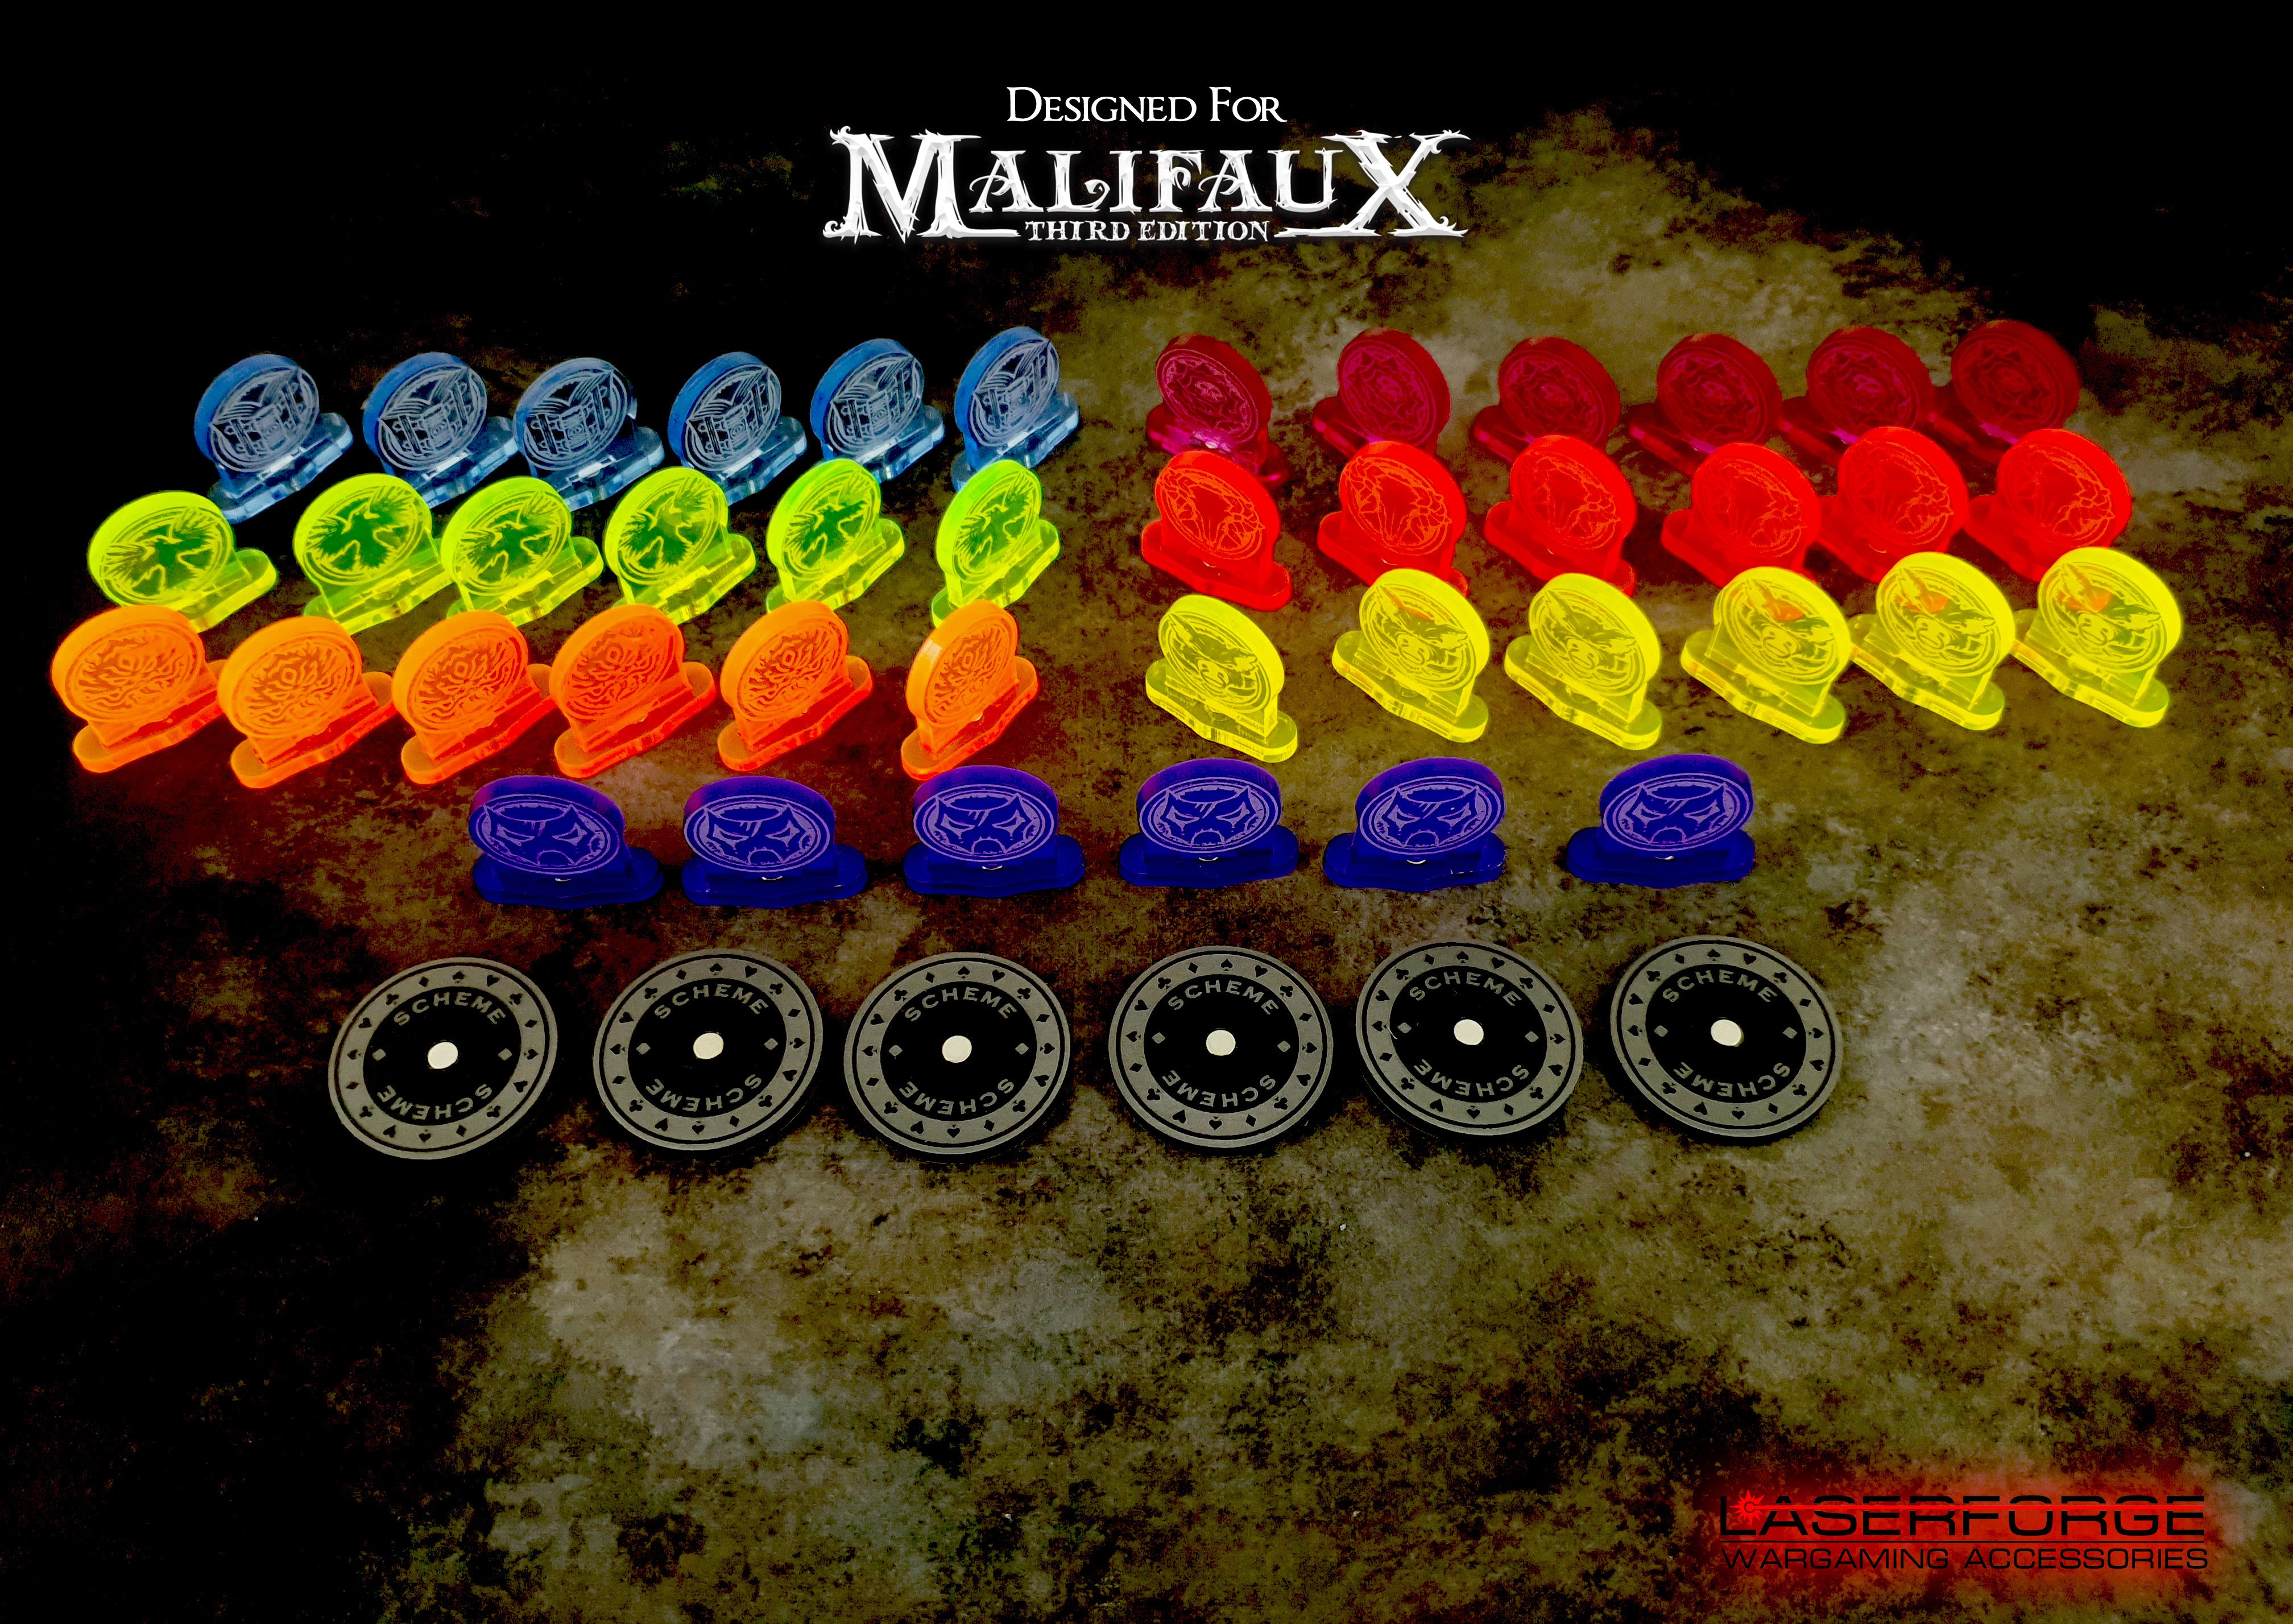 Malifaux Strategy Markers - Magnetic (5) Laserforge Miniatures